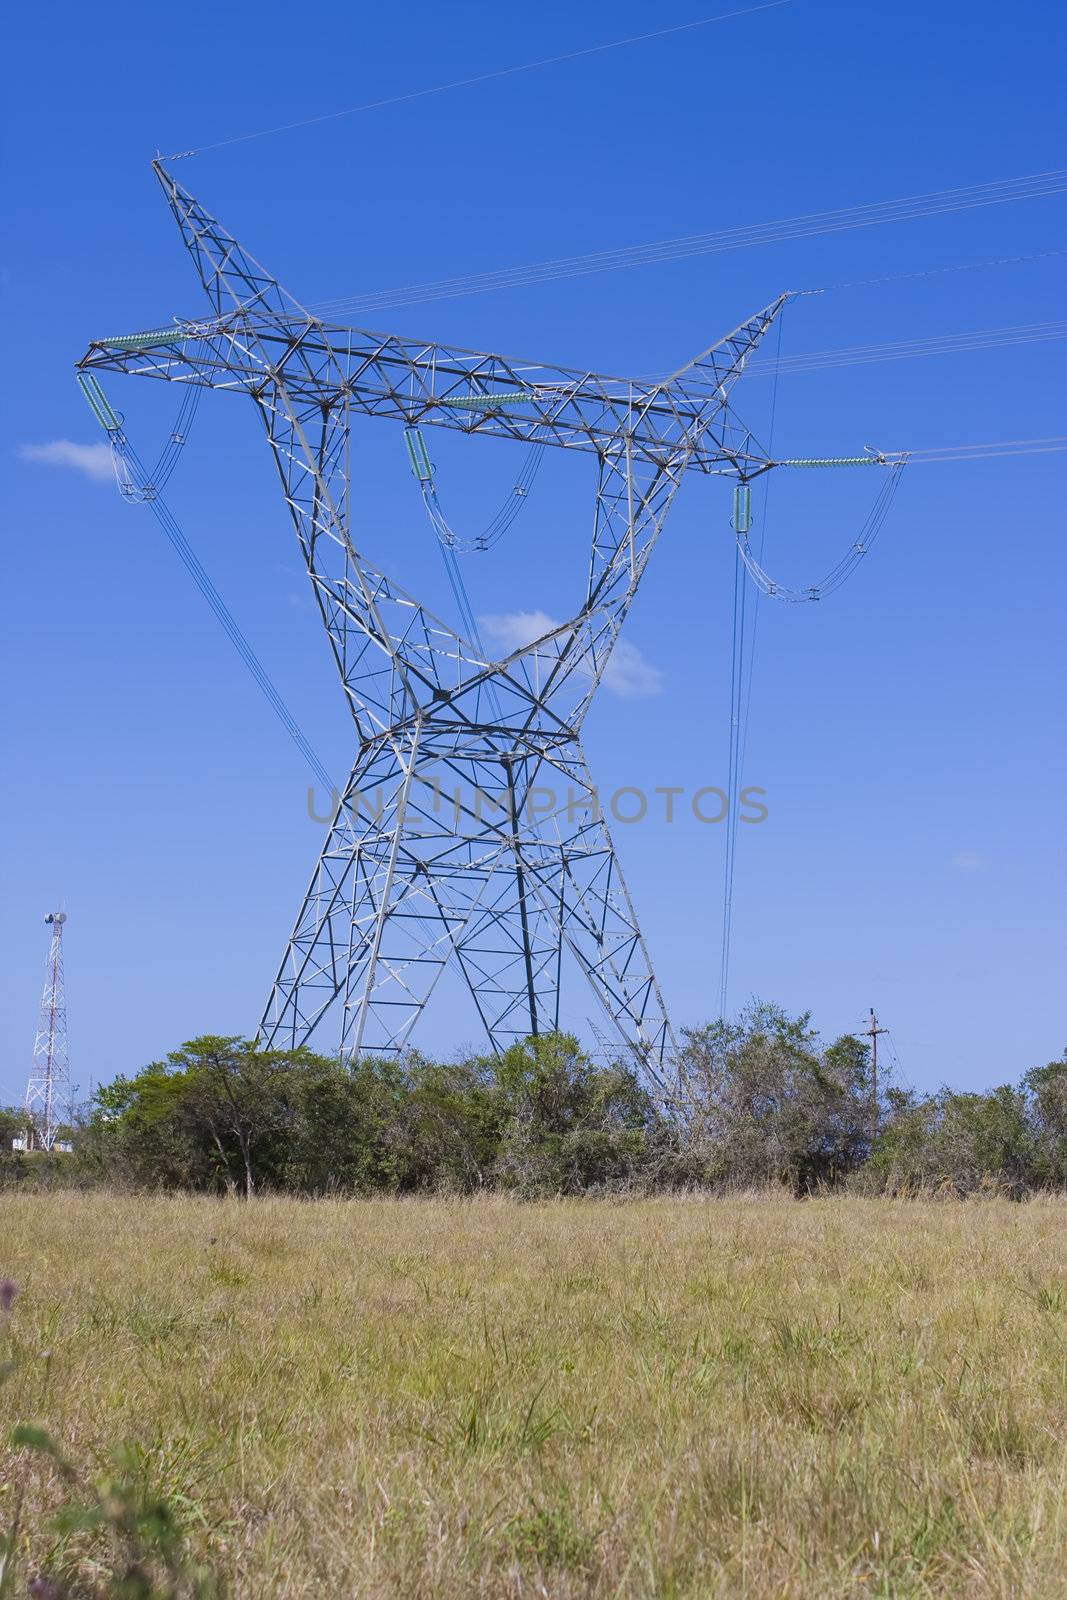 Electrical tower standing in the fields with communication tower behind